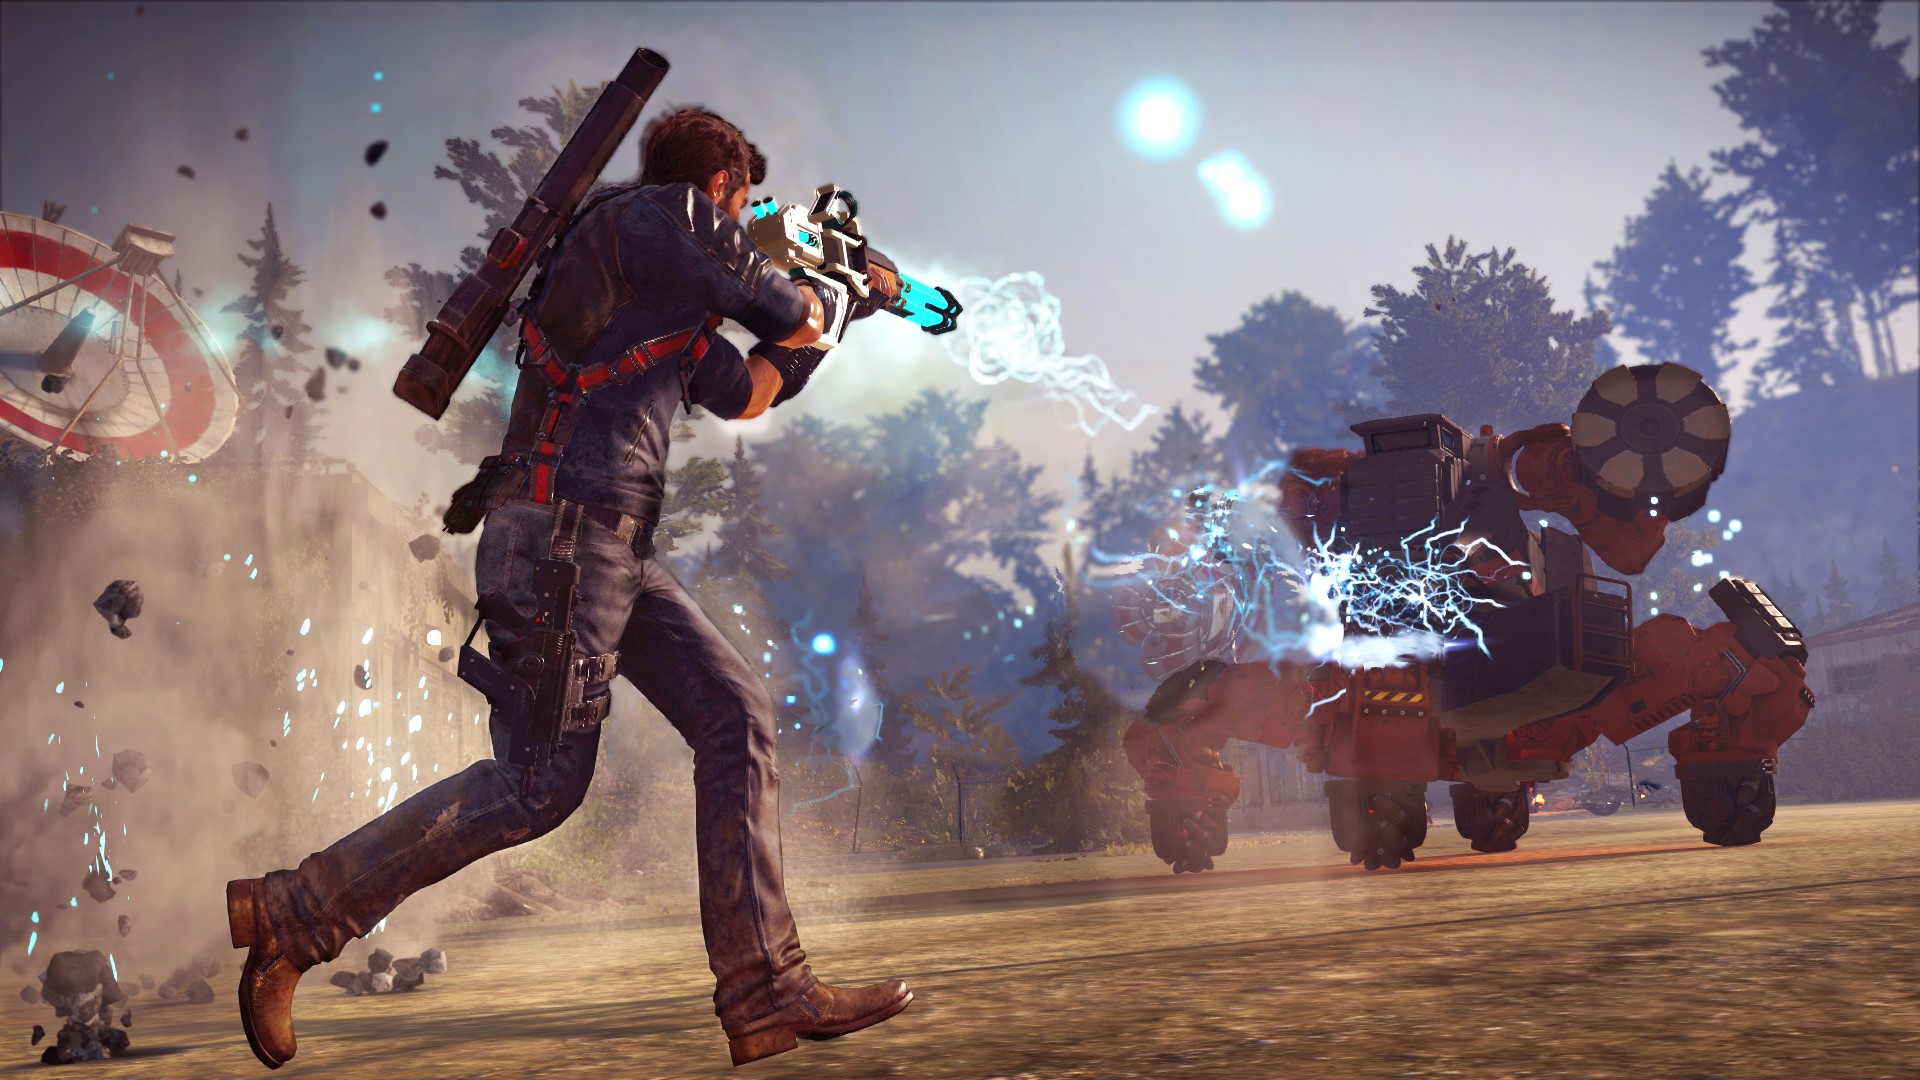 Game info be. Игра just cause 3. Just cause 3: Mech Land Assault. Just cause 3 экшен. Just cause 3: XXL Edition.